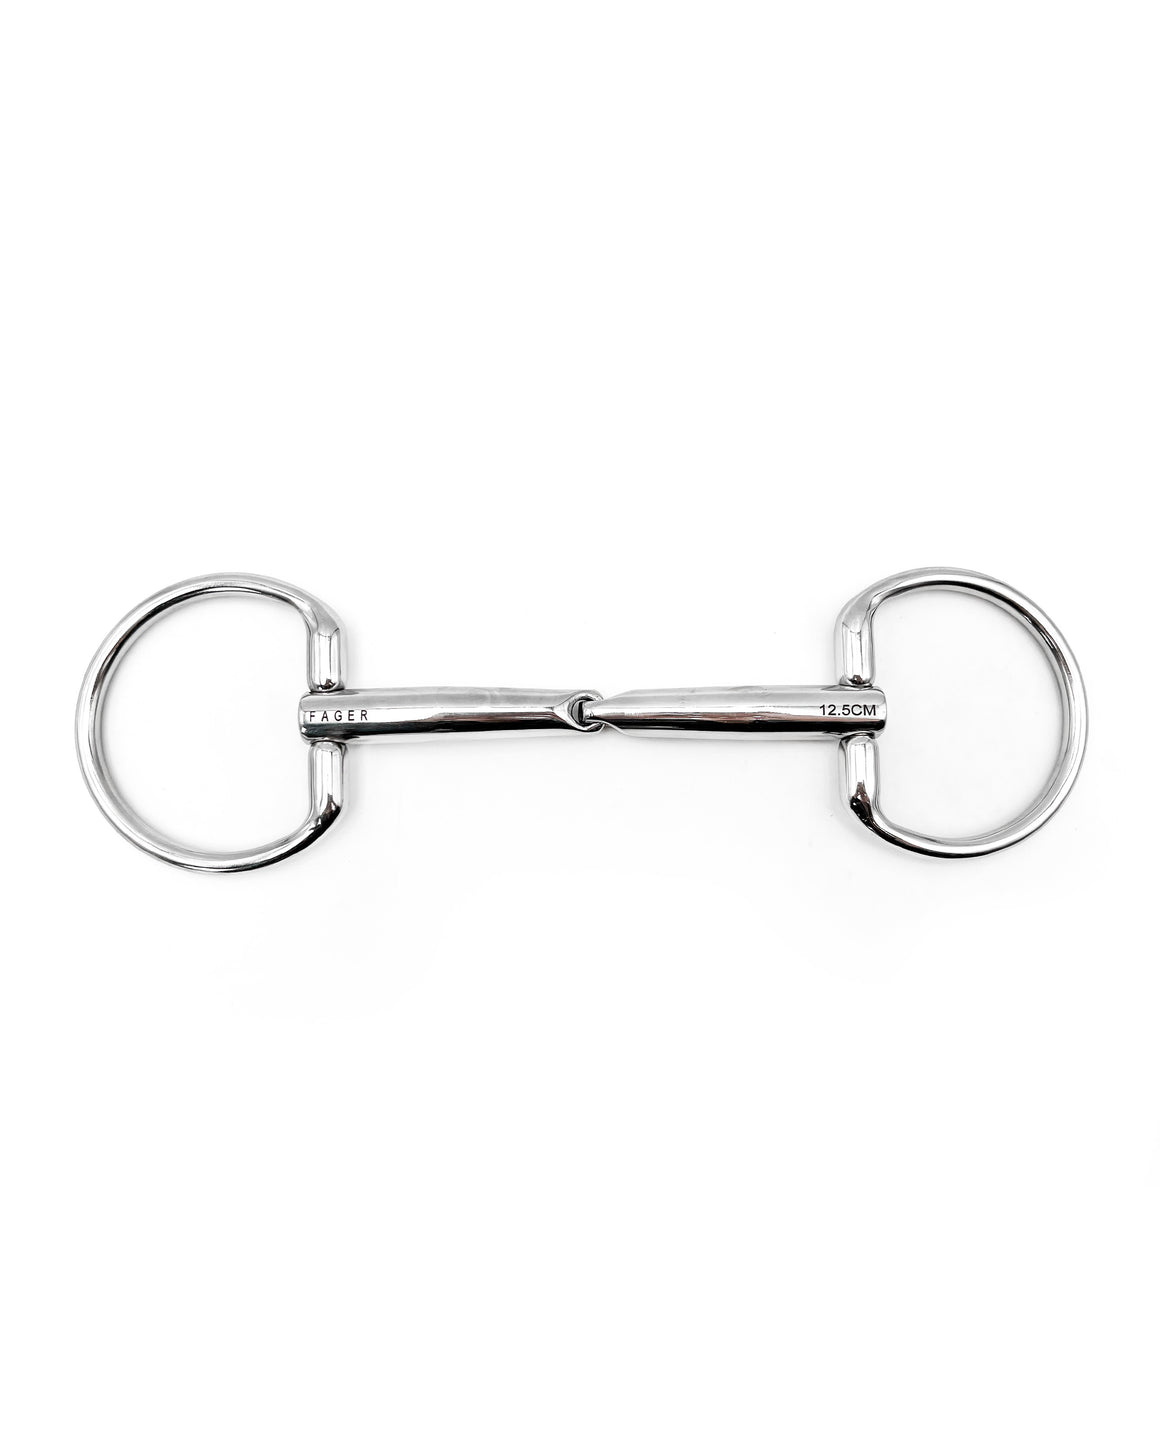 Fager Jimmy Fixed Rings Stainless Steel